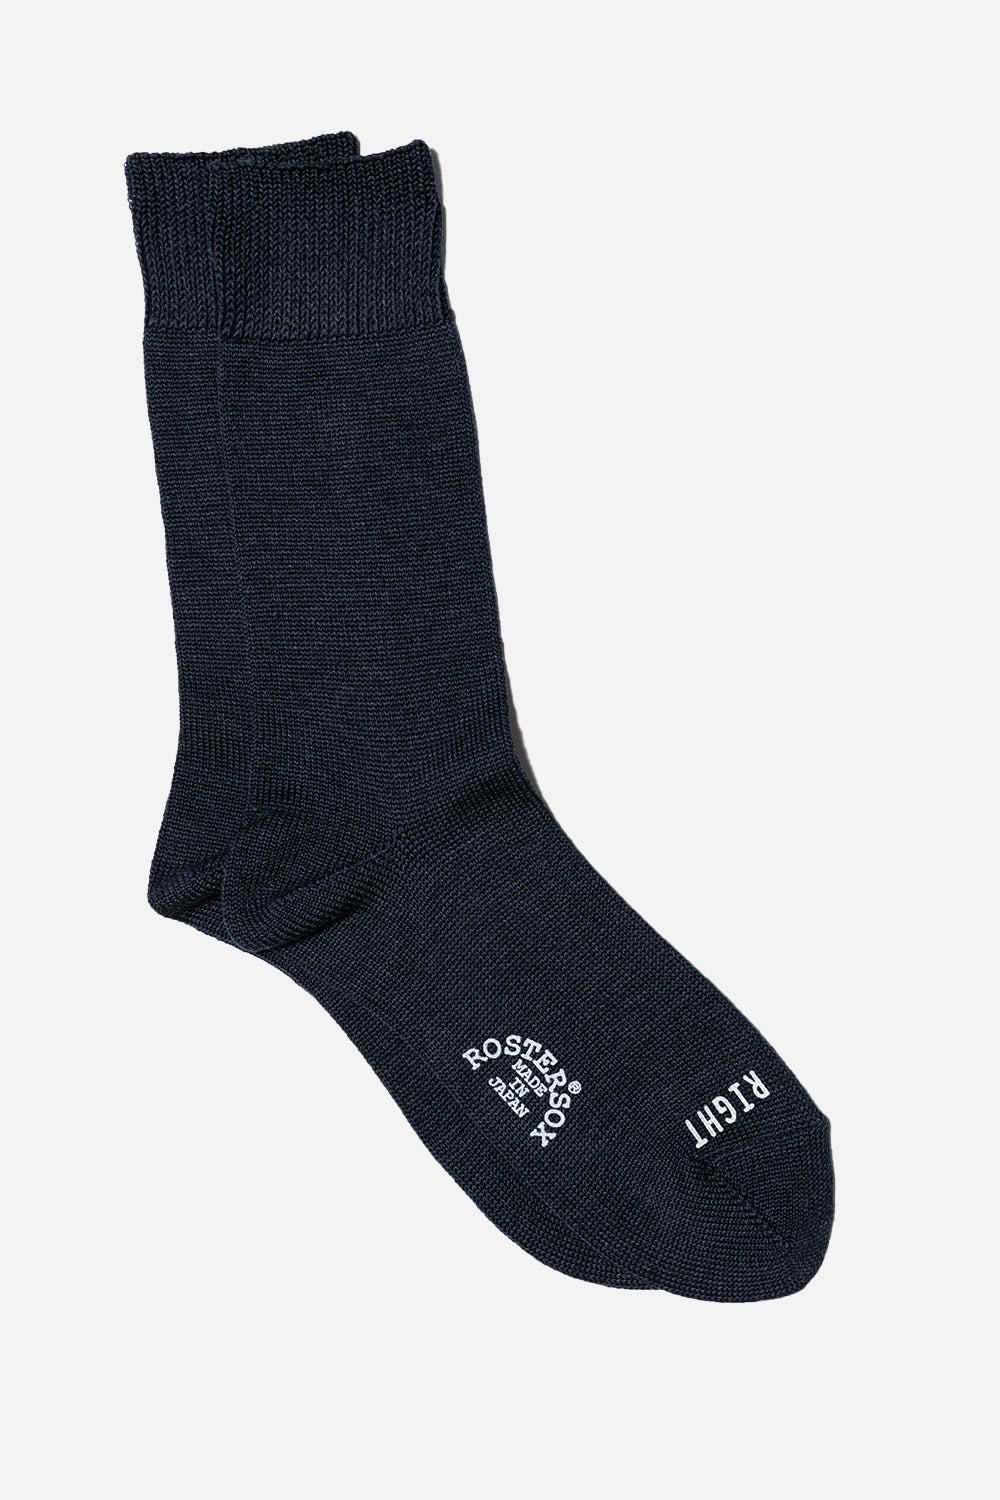 rostersox-rs-63-navy-giza